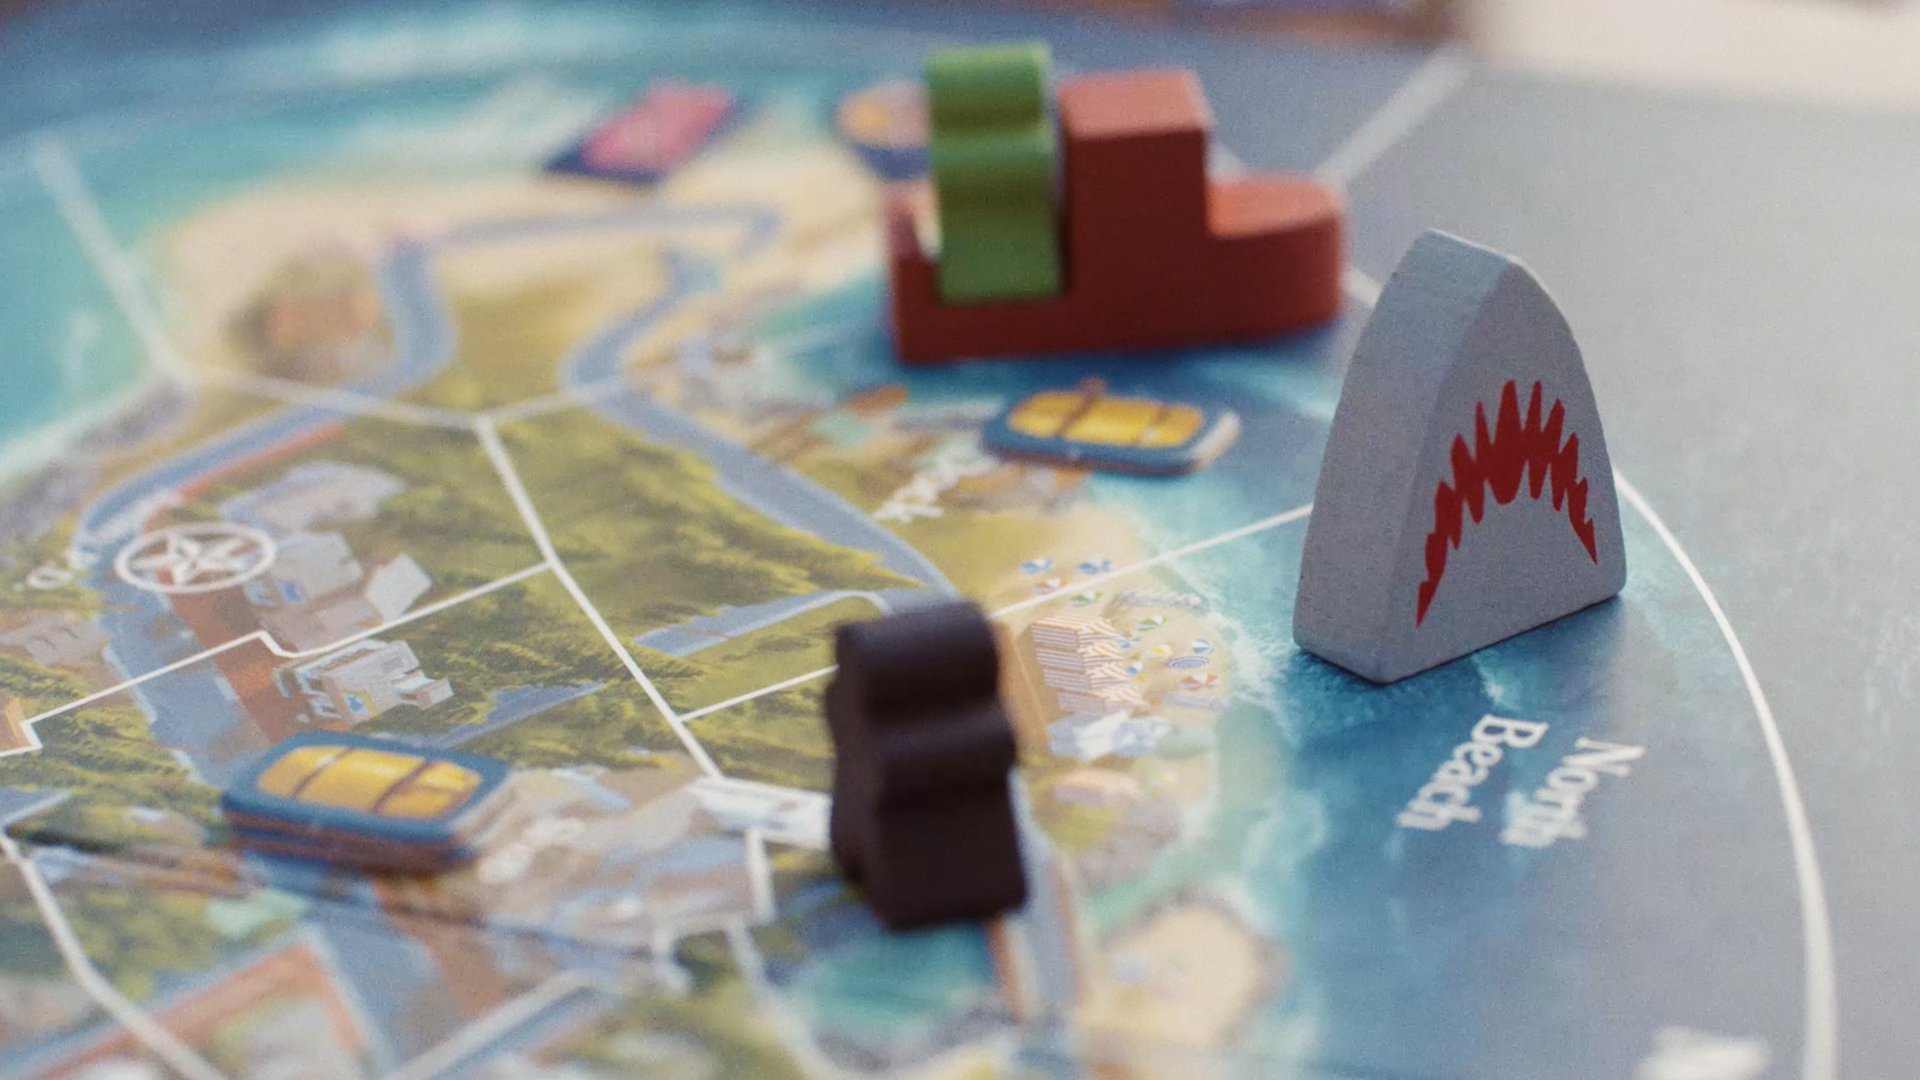 Jaws board game close up